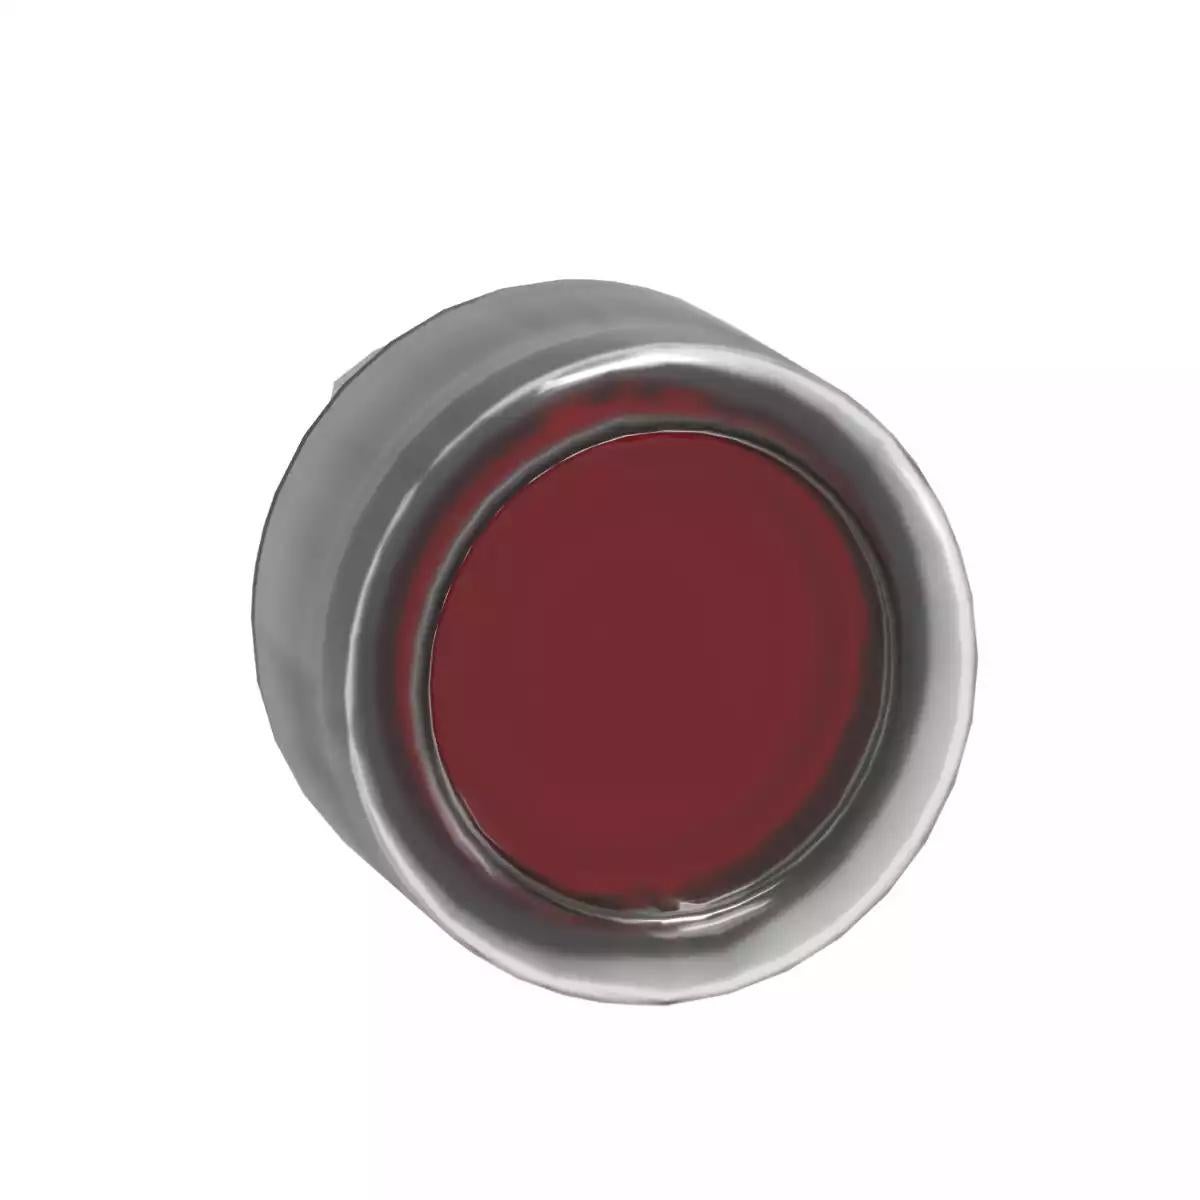 Head for illuminated push button, Harmony XB4, metal, red flush, 22mm, universal LED, spring return, clear boot, unmarked